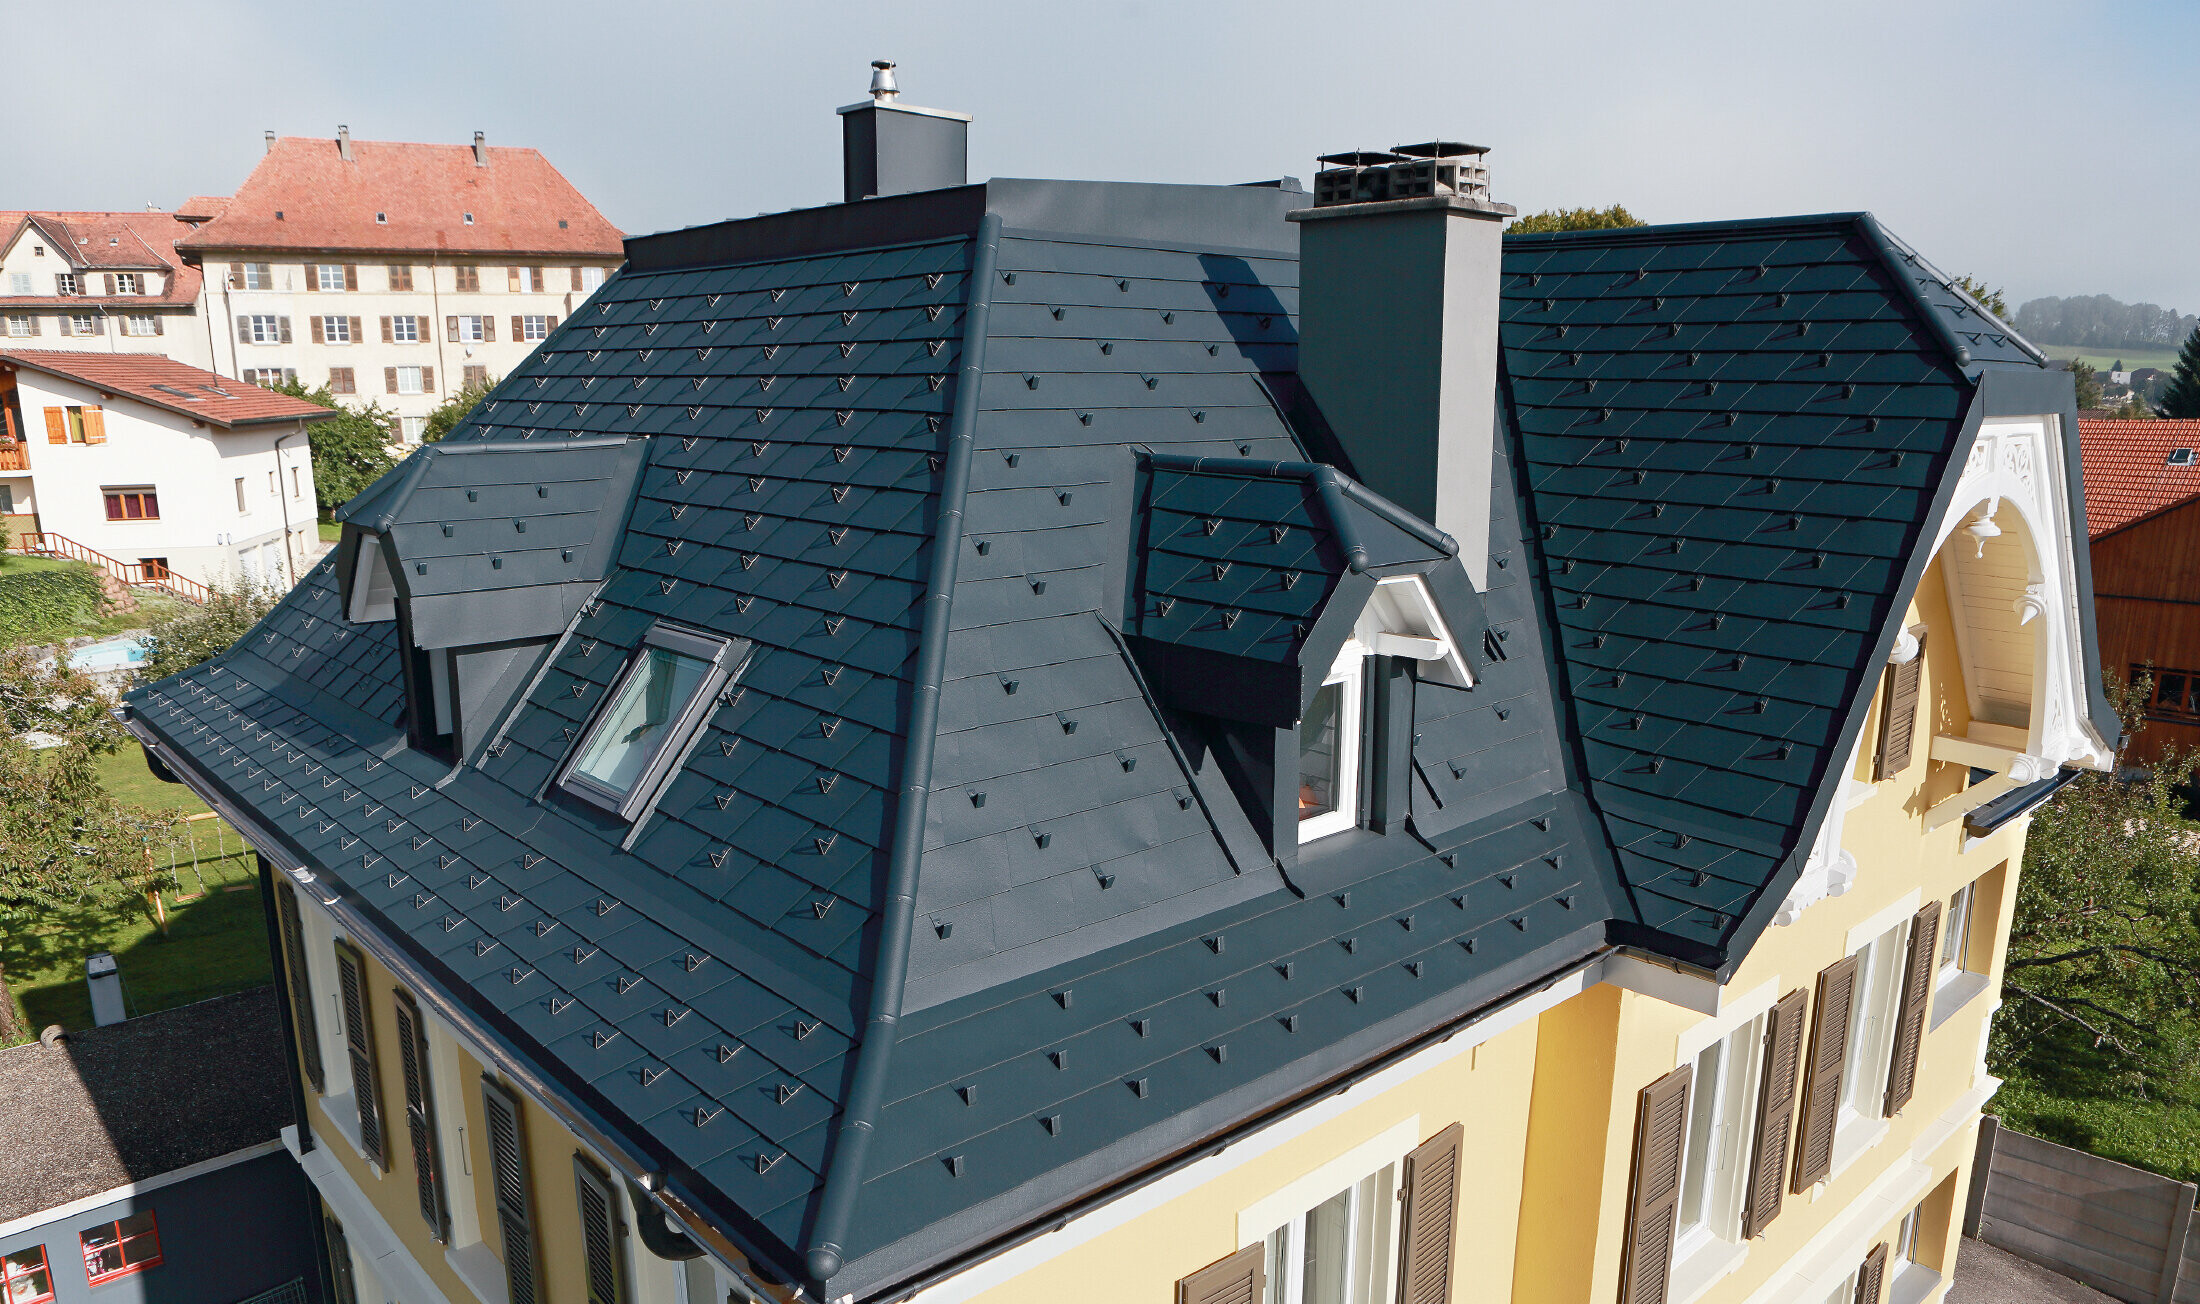 Villa in Switzerland, the roof has many valleys and small dormers, the roof is covered with an aluminium shingle from PREFA in P.10 anthracite.